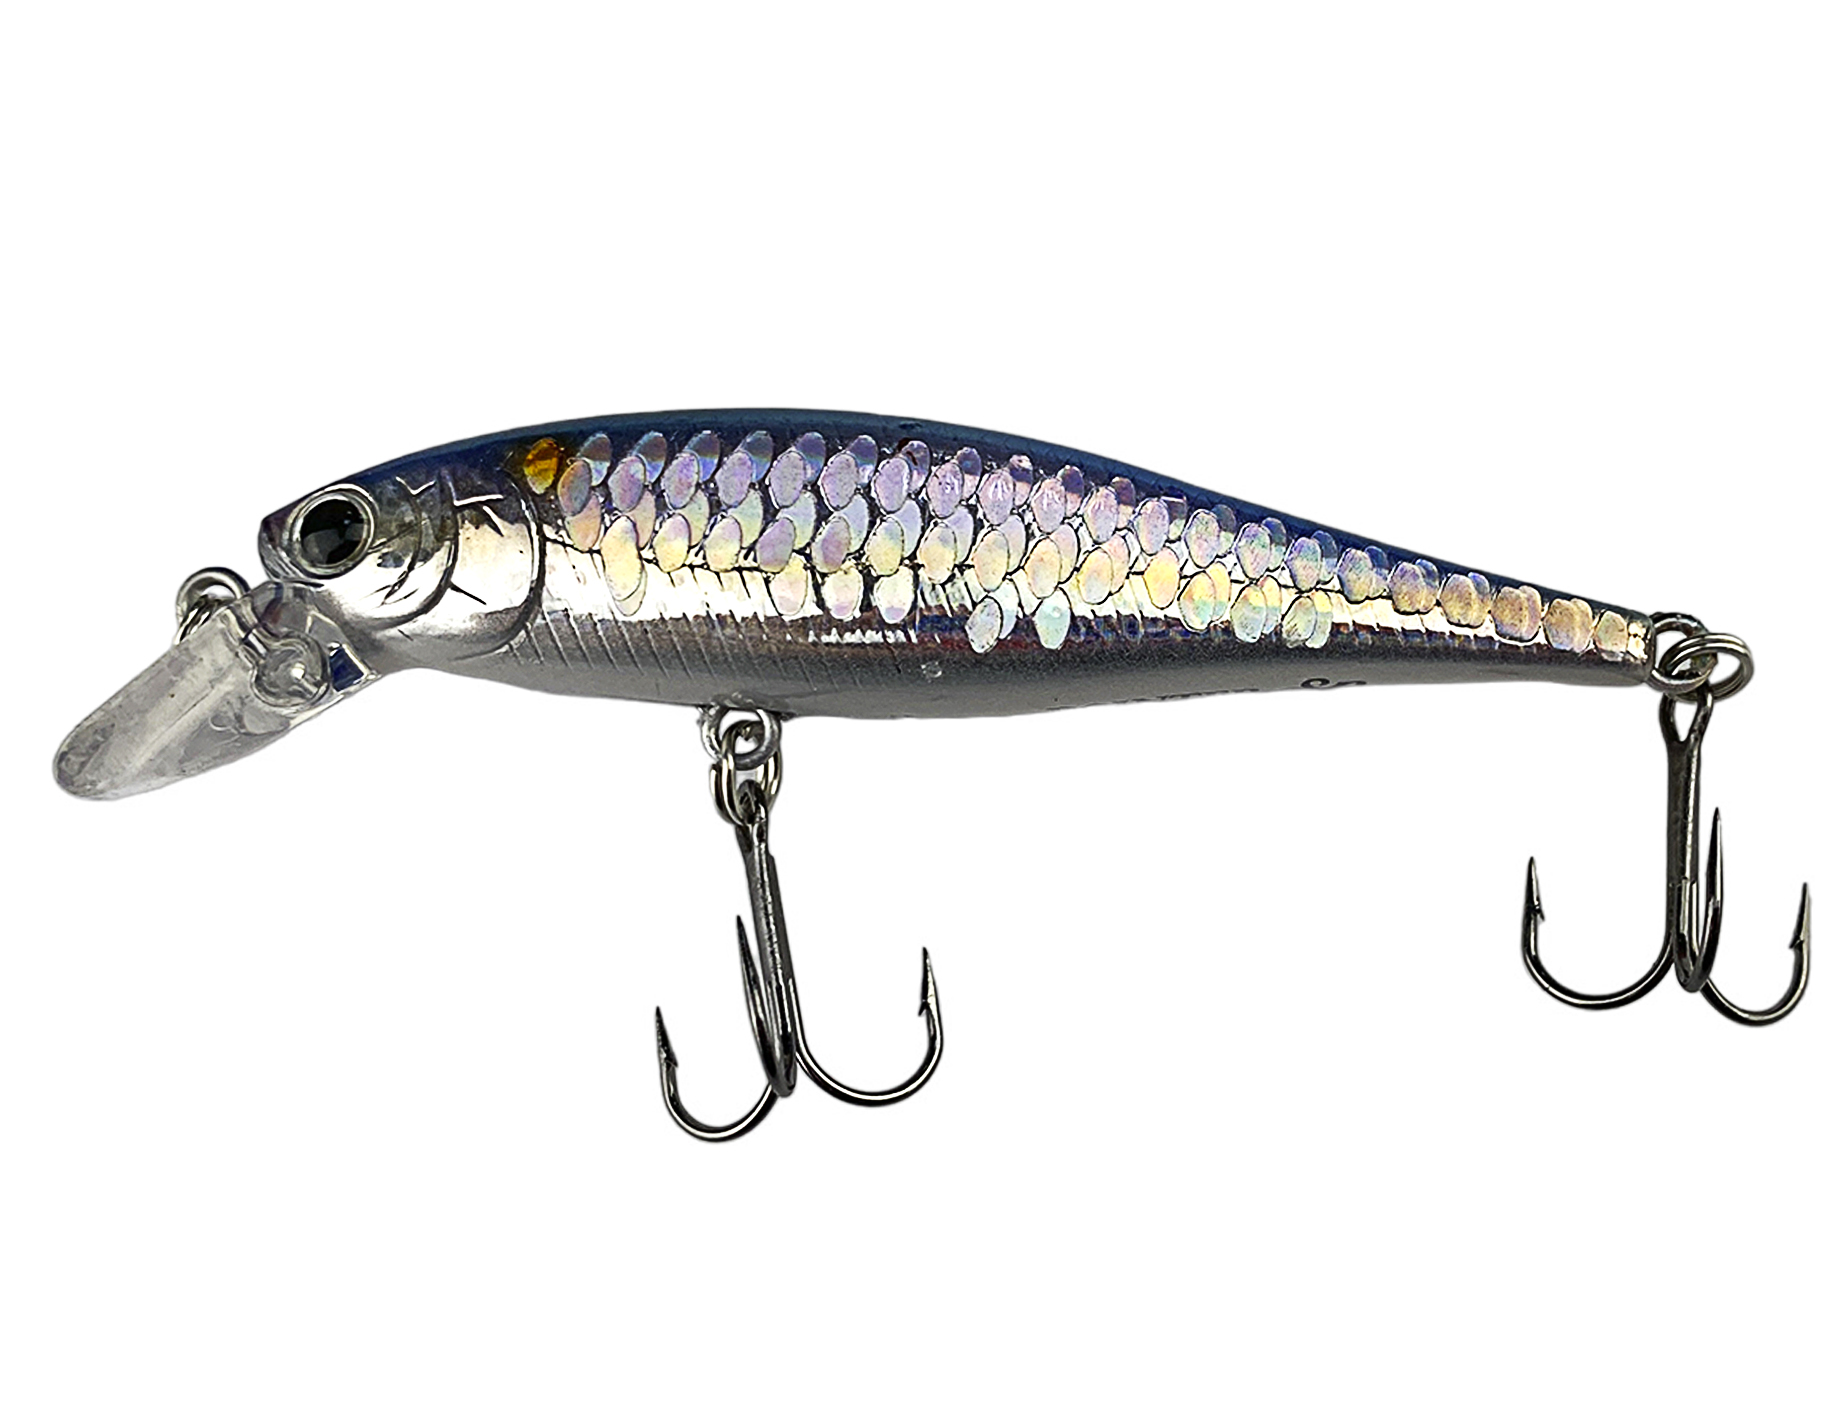 Воблер Lucky Craft Pointer 65 SP 270 MS american shad - фото 1